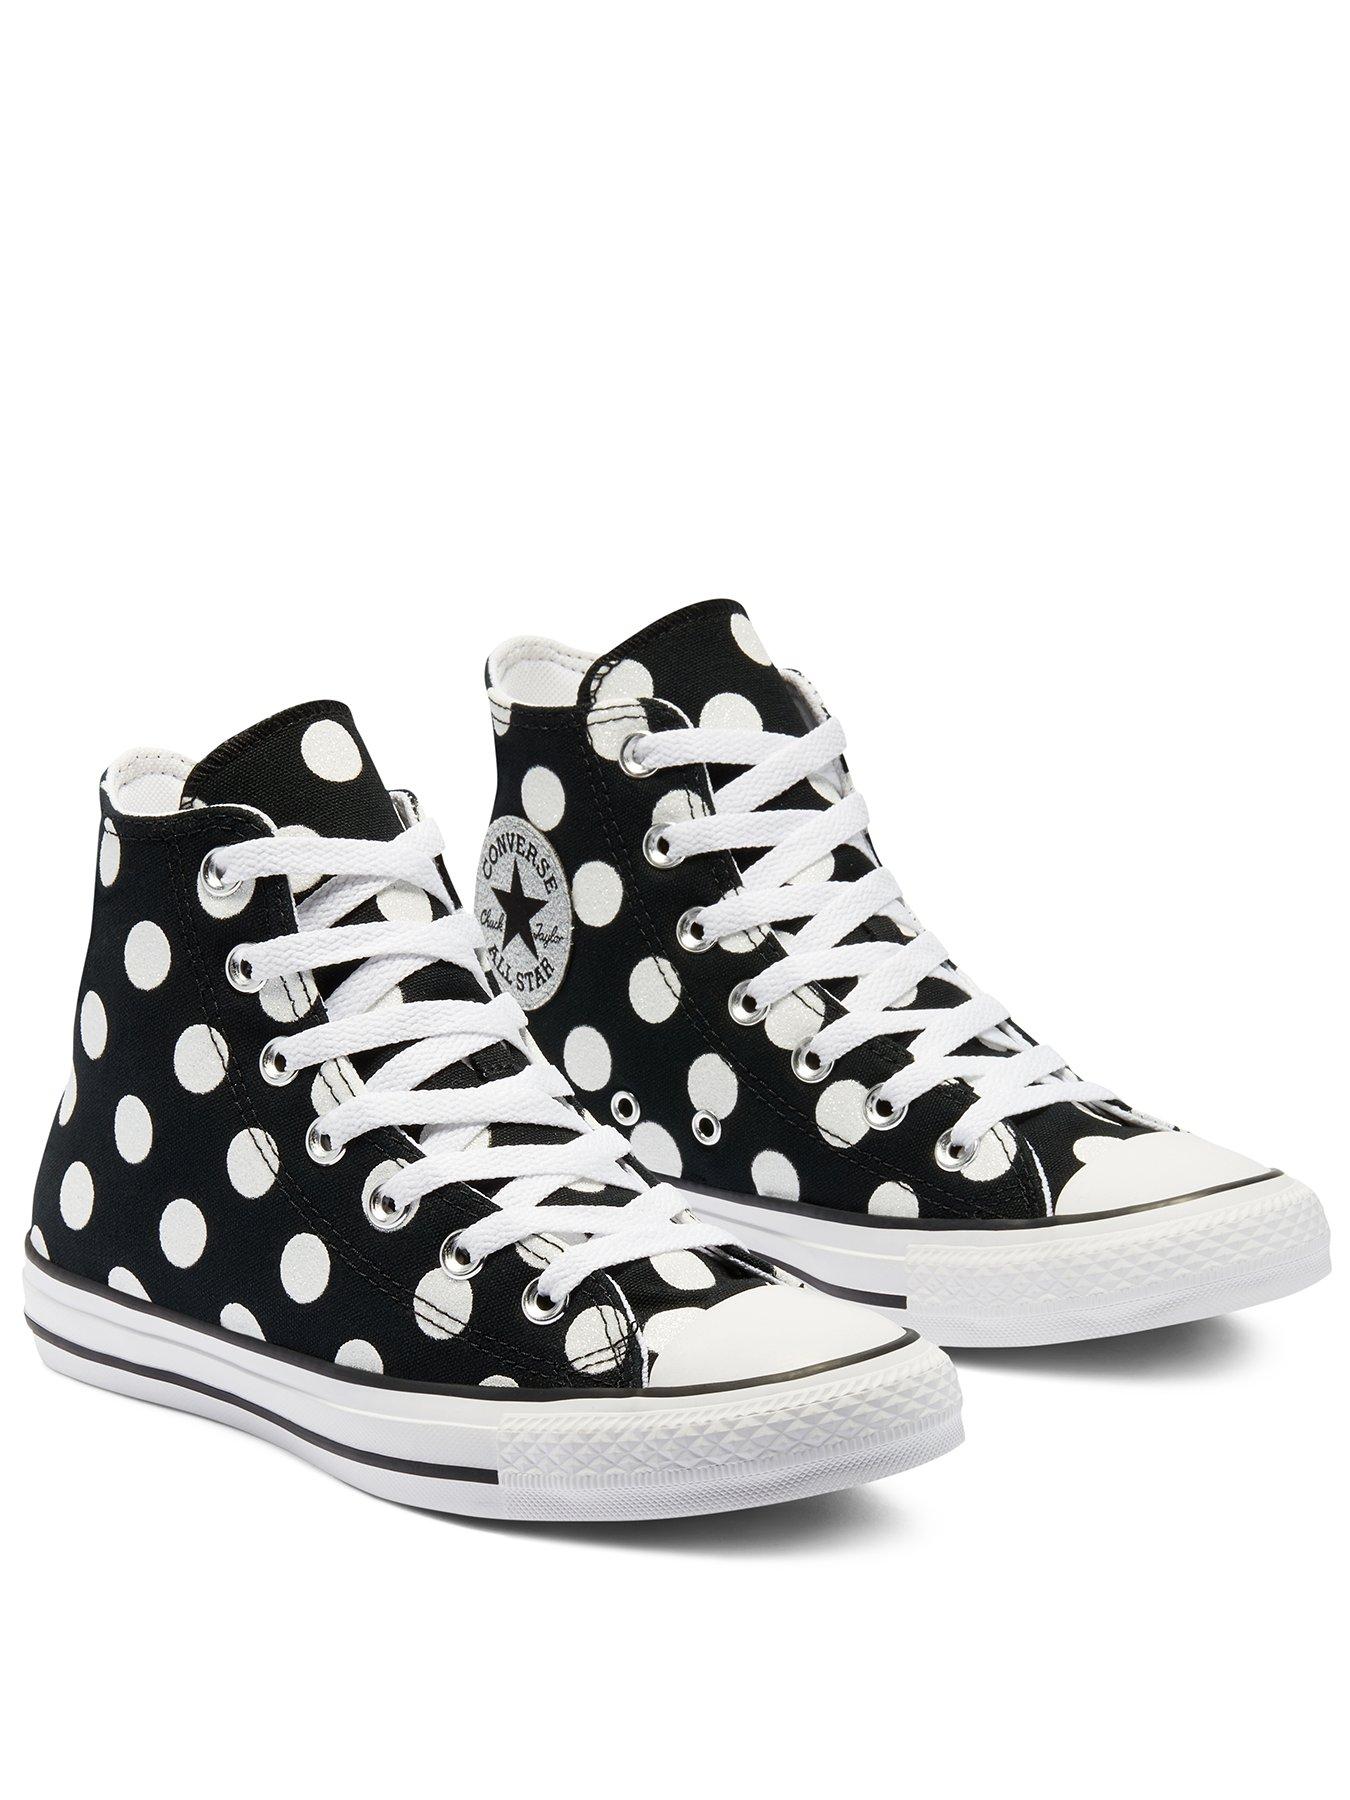 Converse Chuck Taylor All Star Hi | Trainers | Women | www.very.co.uk